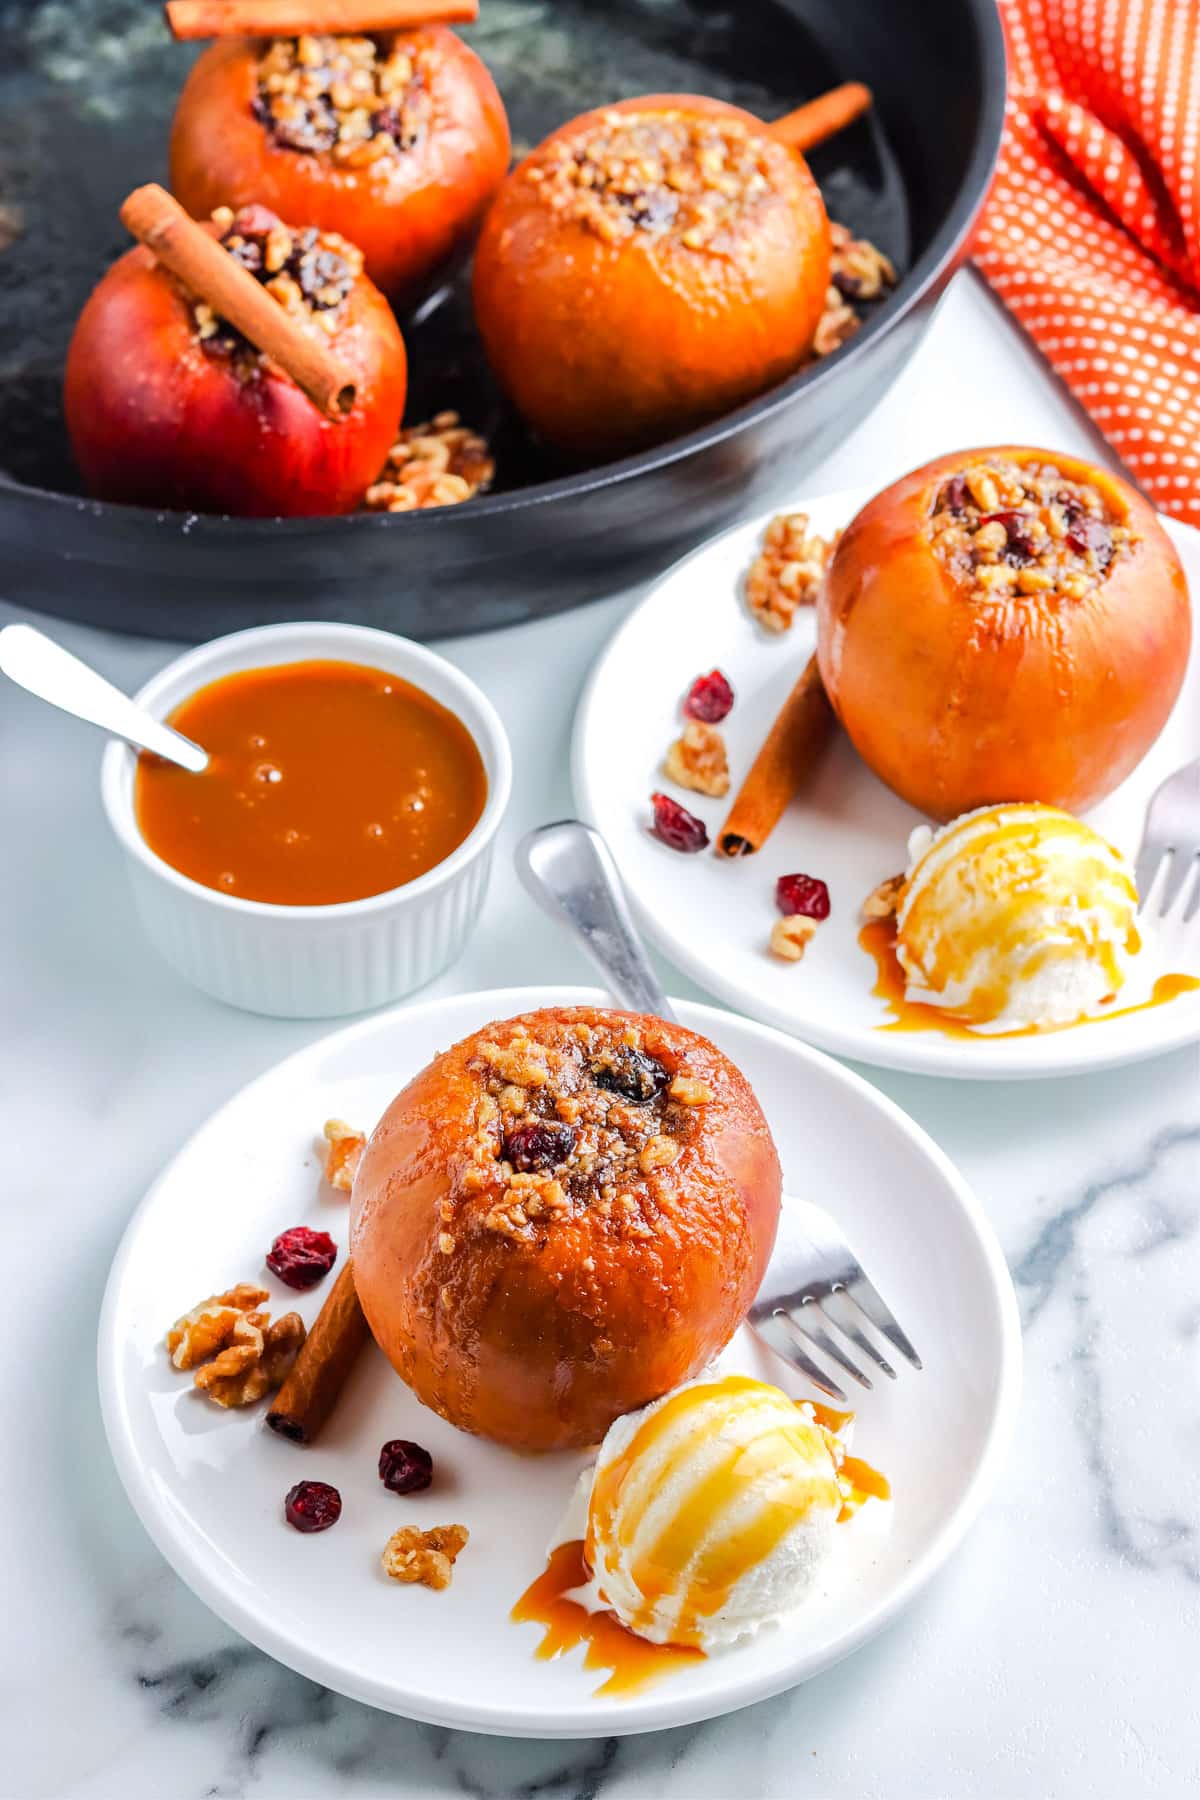 Smoked Apples on white plates with scoops of vanilla ice cream and caramel sauce.